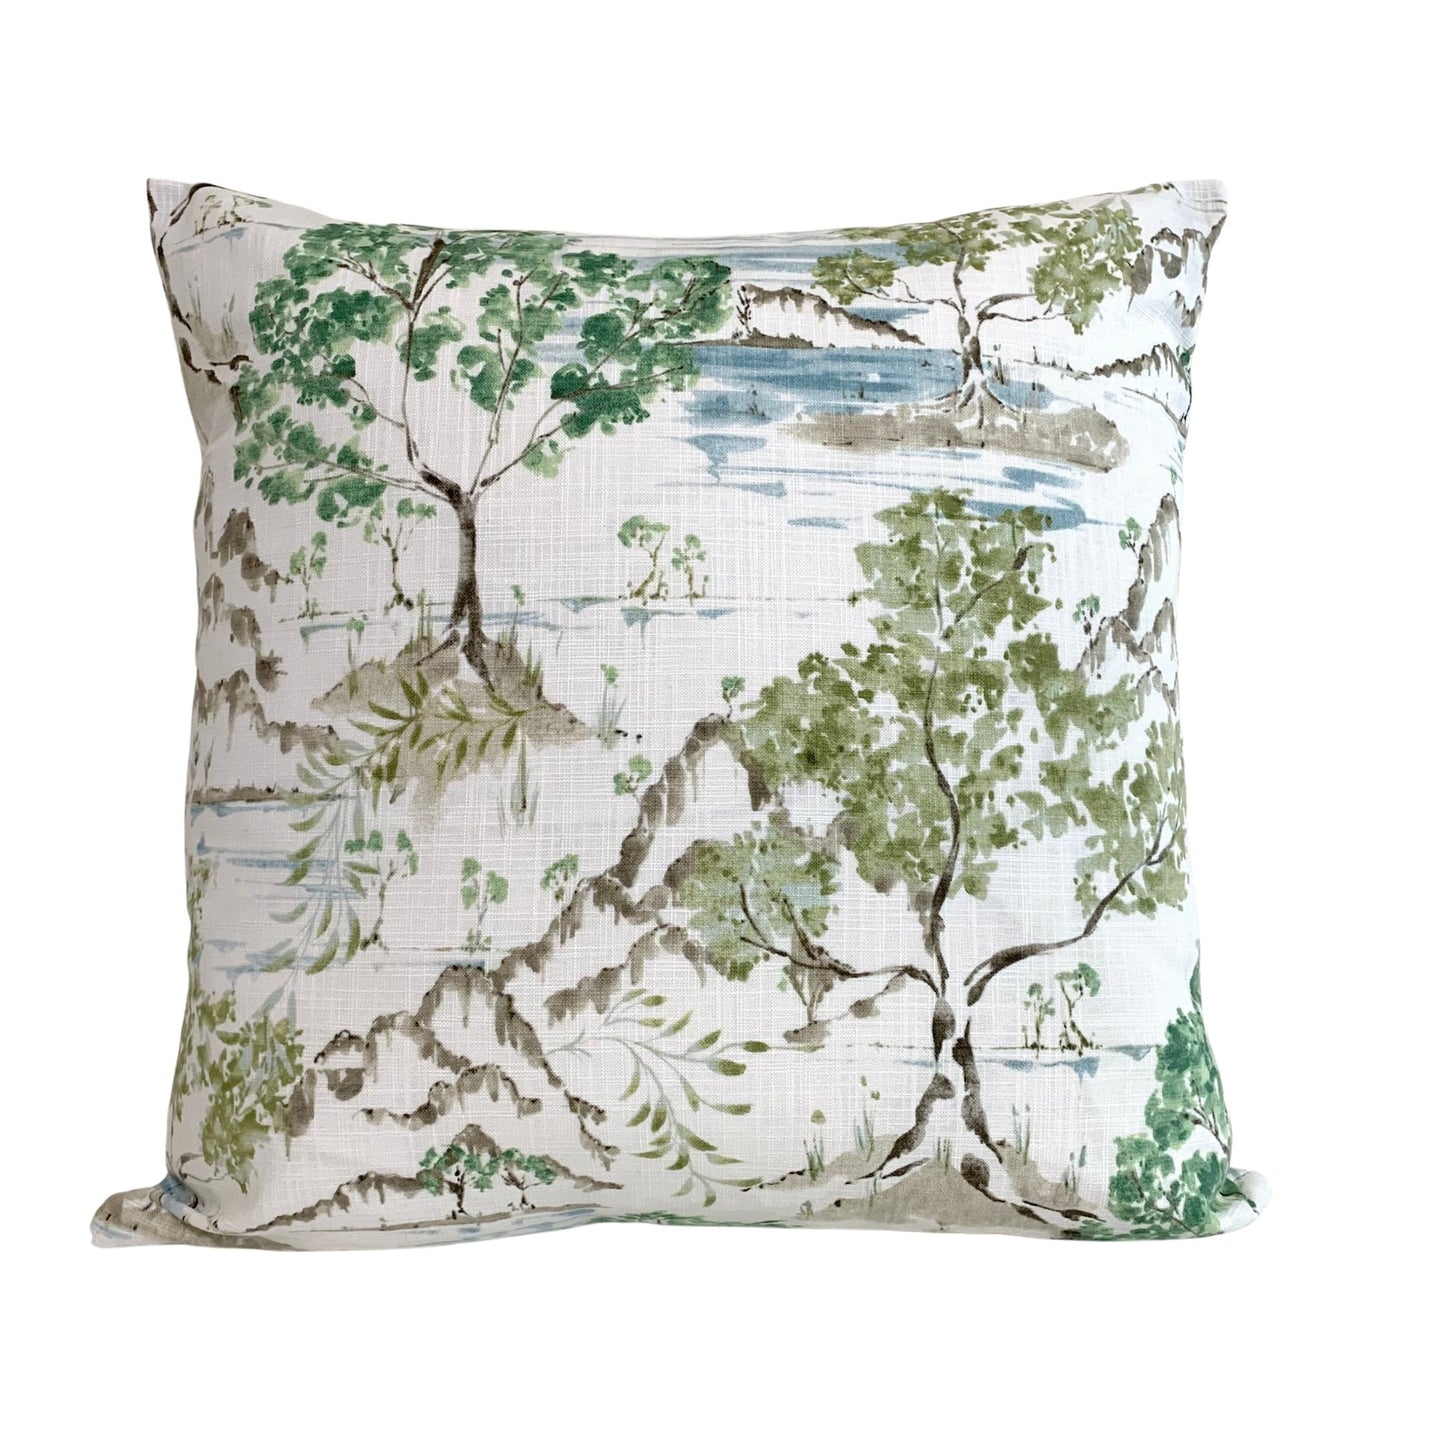 Ballard Designs Glenna Toile Pillow Cover in Willow - Available in Bolster, Lumbar, Throw, Euro Sham Sizes